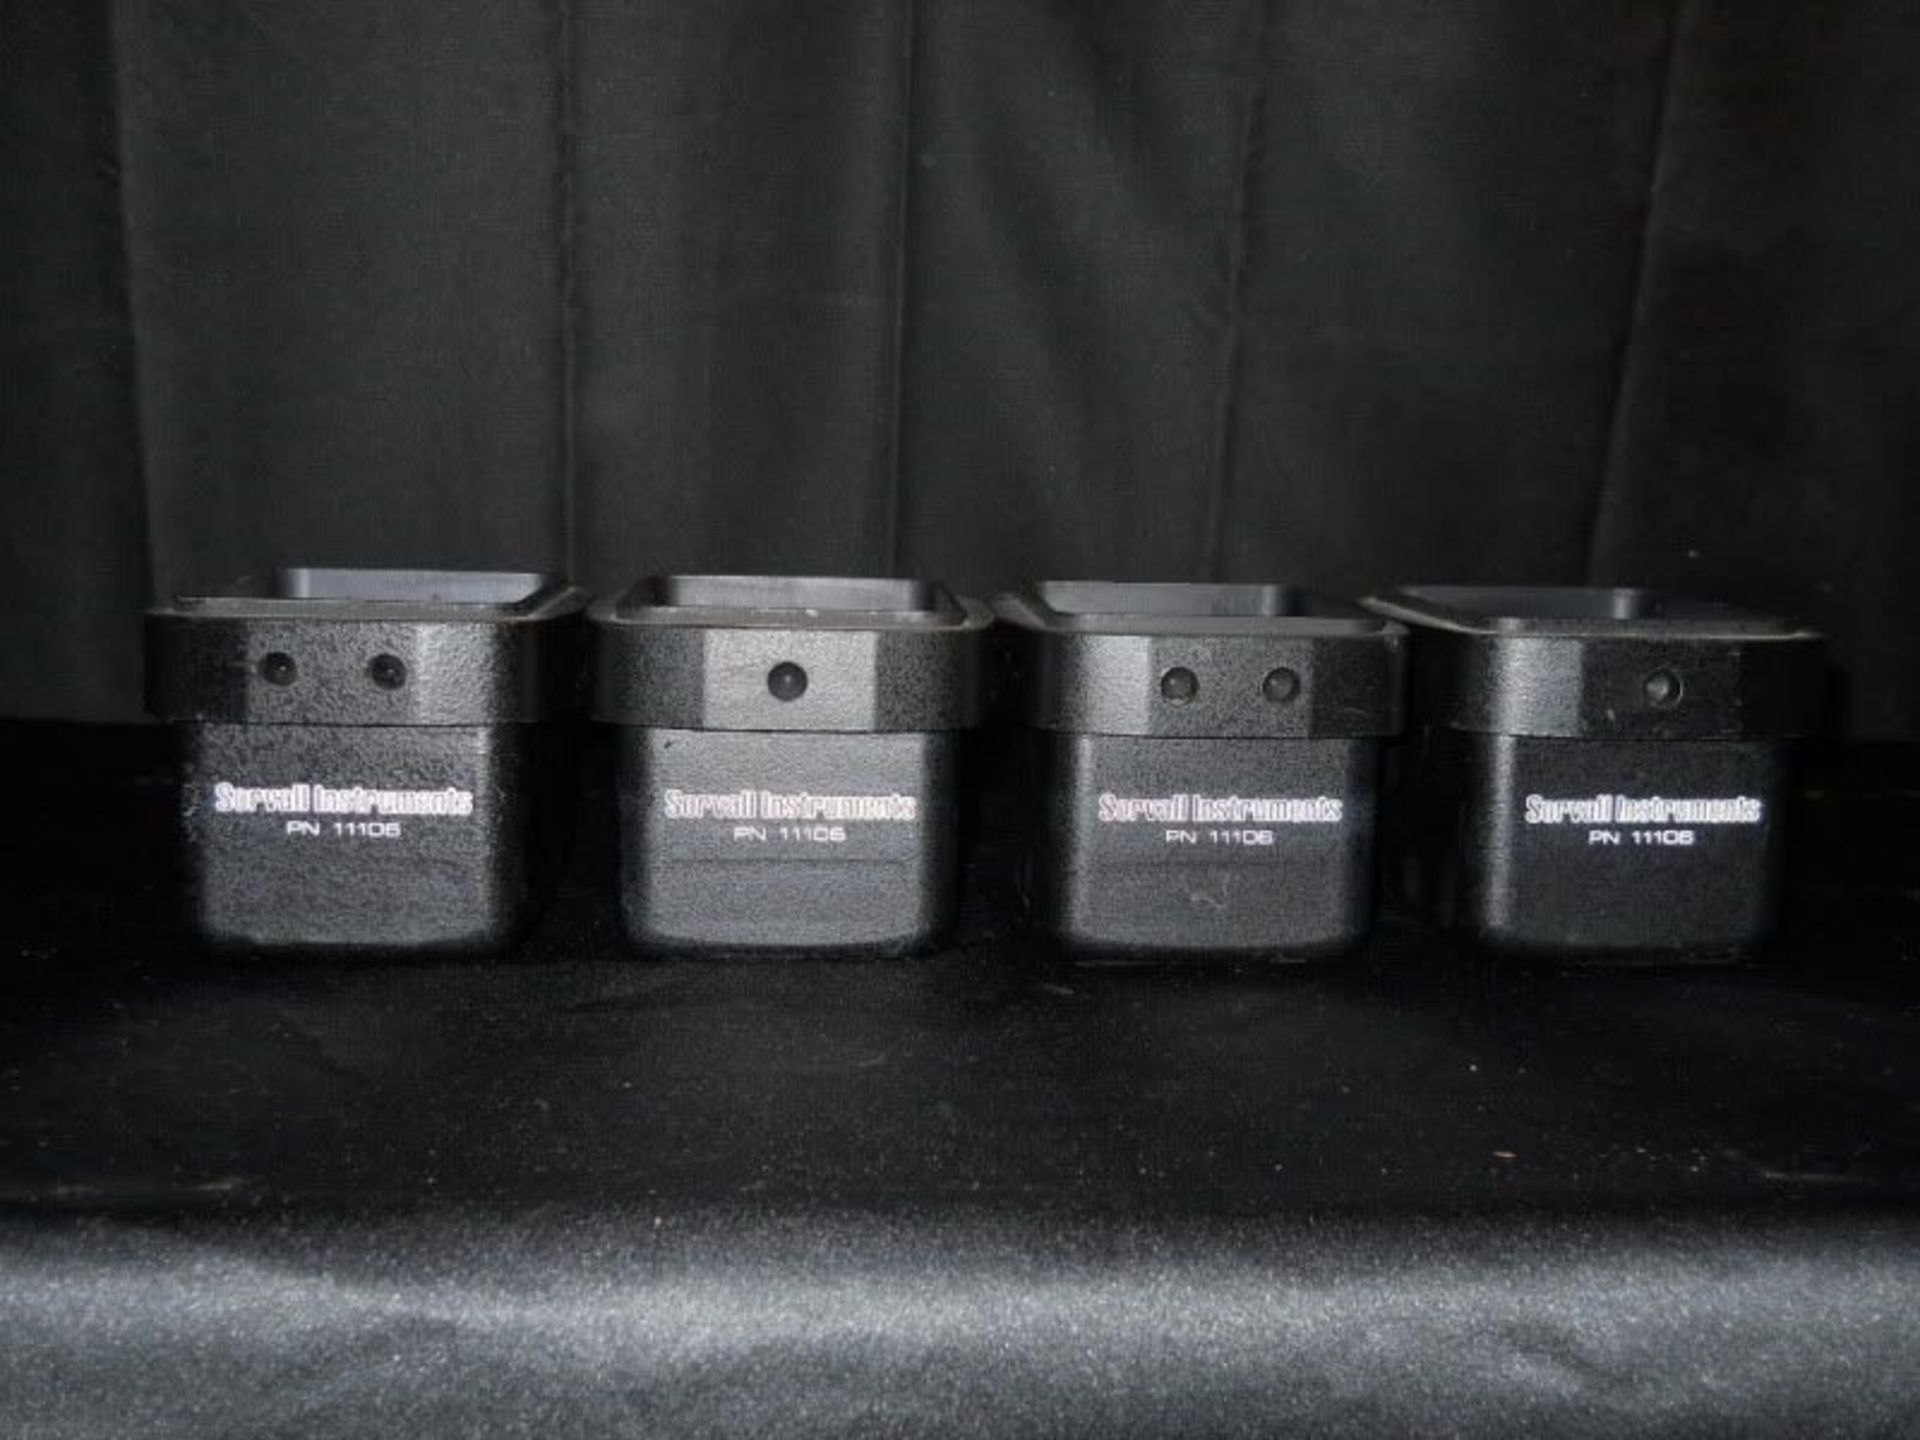 Lot of 4 Sorvall Instruments Centrifuge Swing Buckets Part Number 11106 (#11), Qty 1, 330818052338